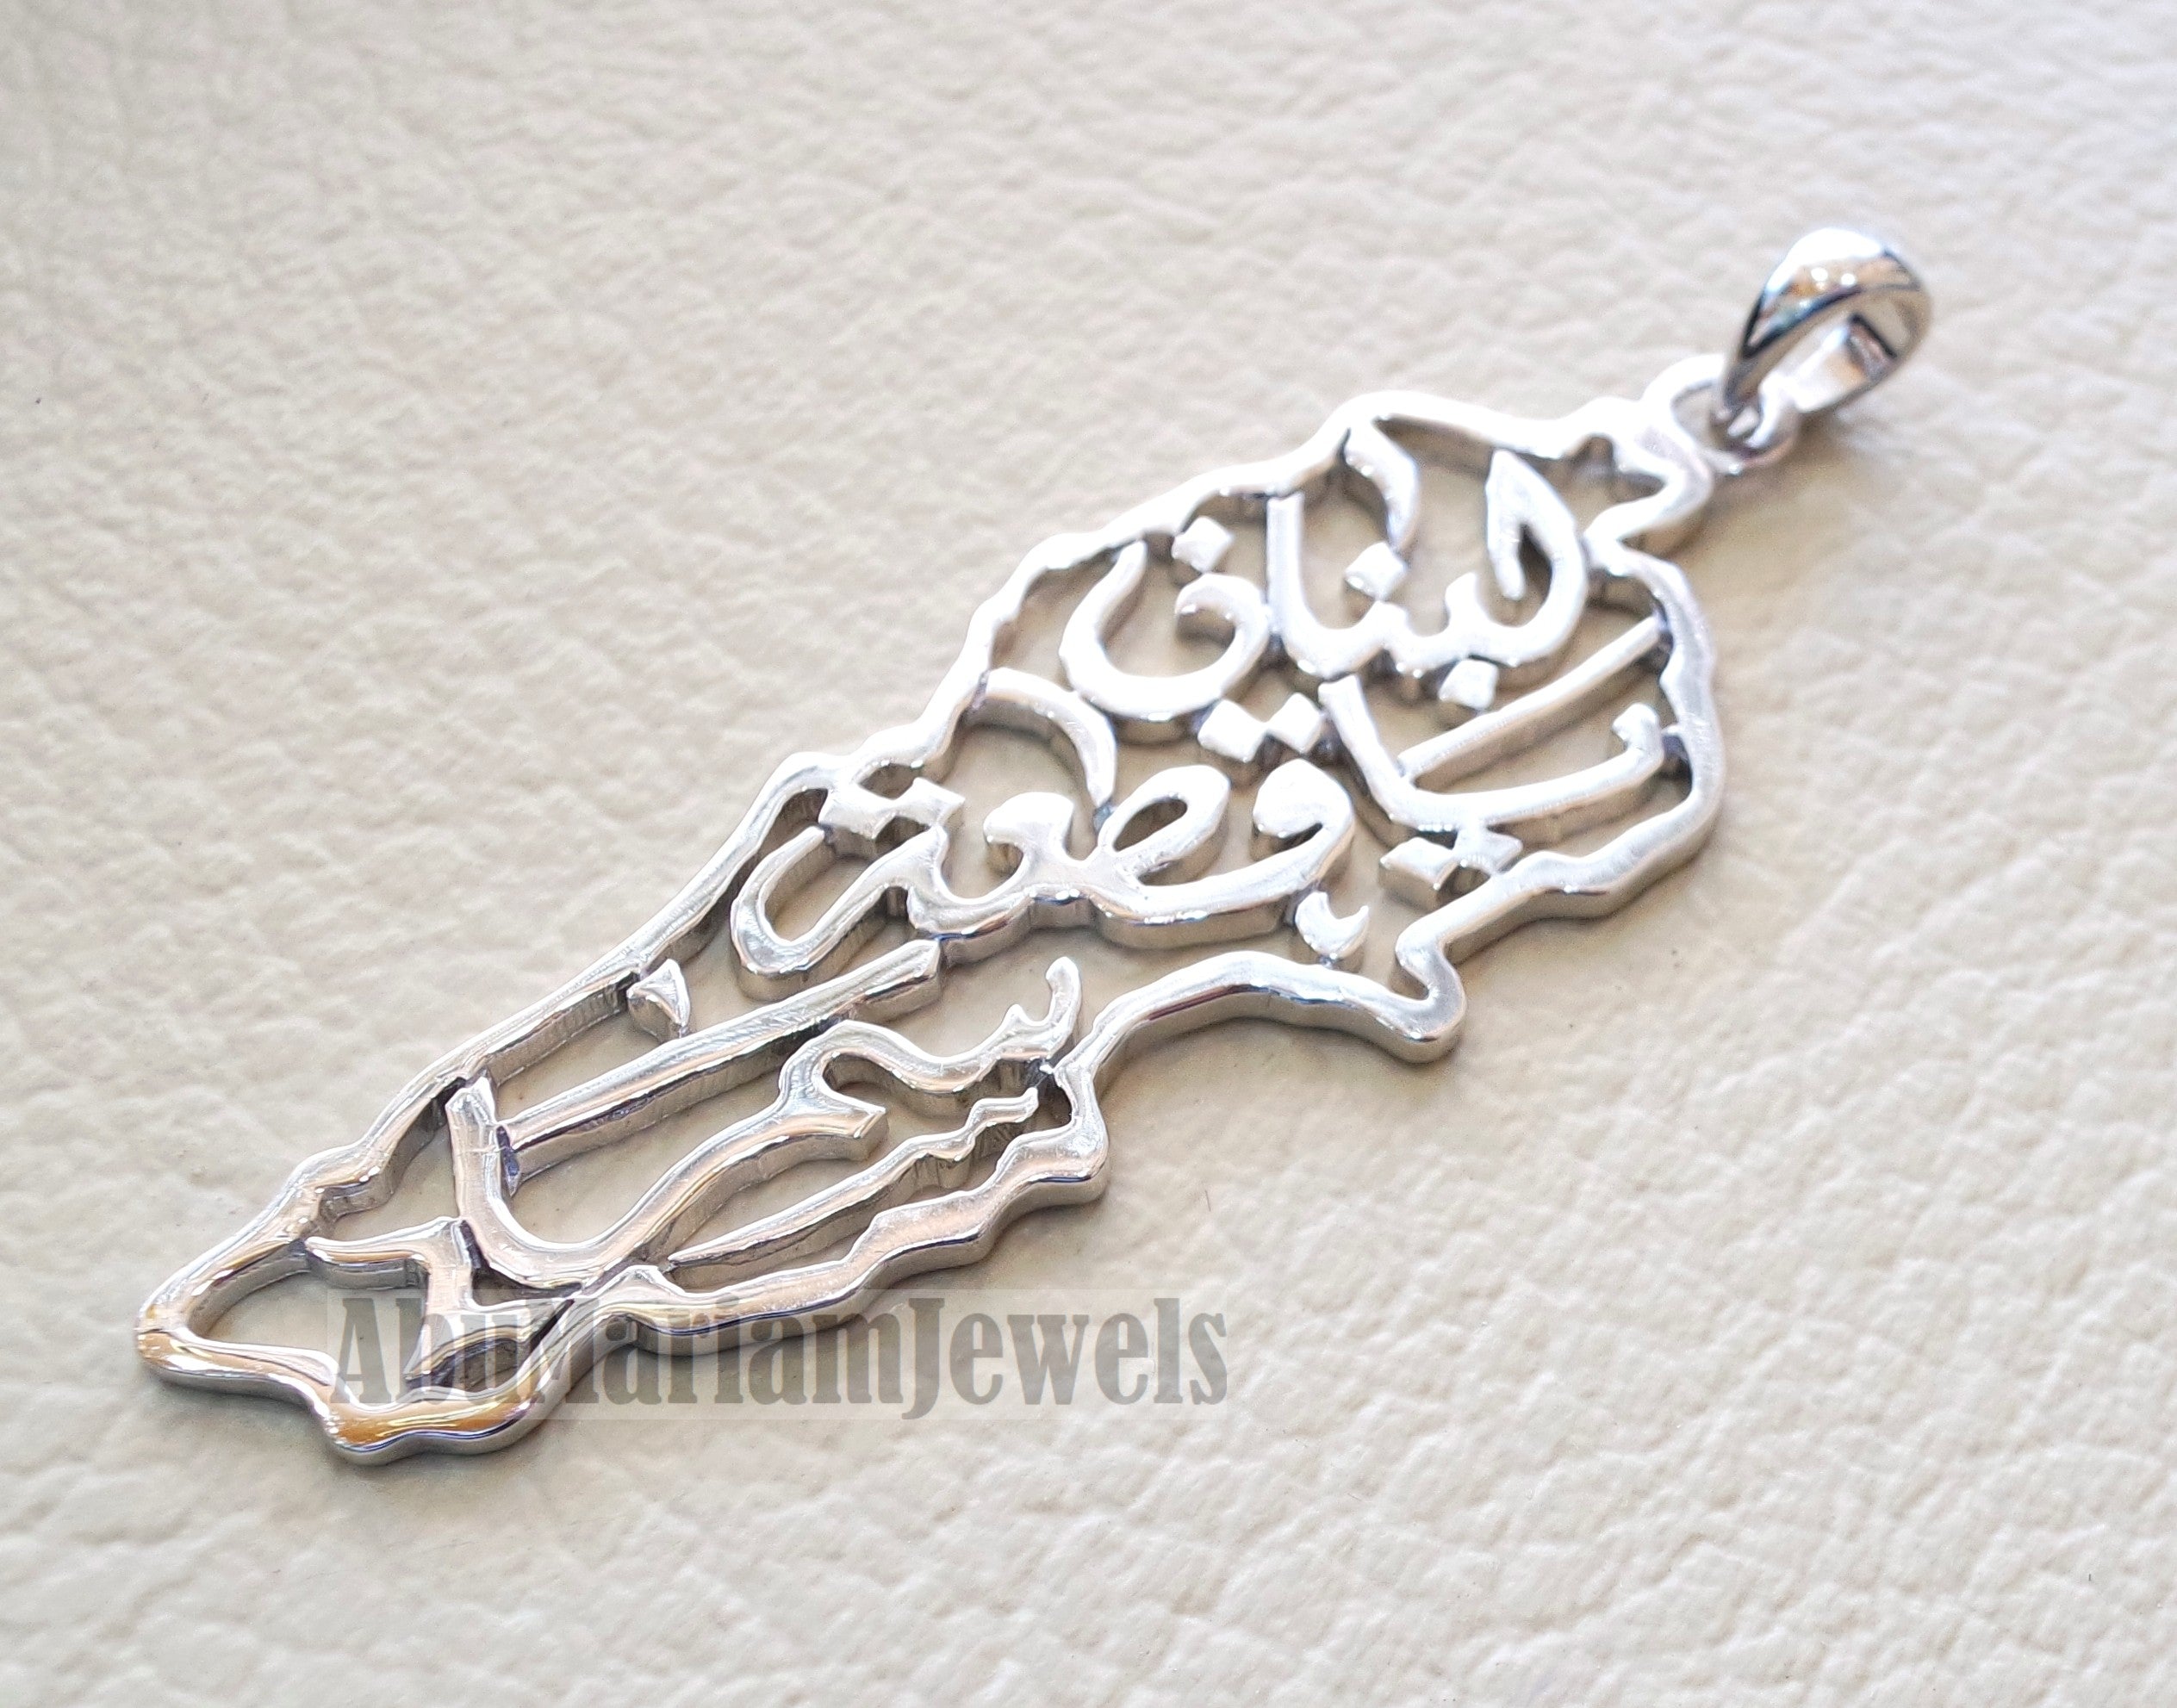 Lebanon map pendant with famous calligraphy verse sterling silver 925 k high quality jewelry arabic fast shipping خريطة لبنان